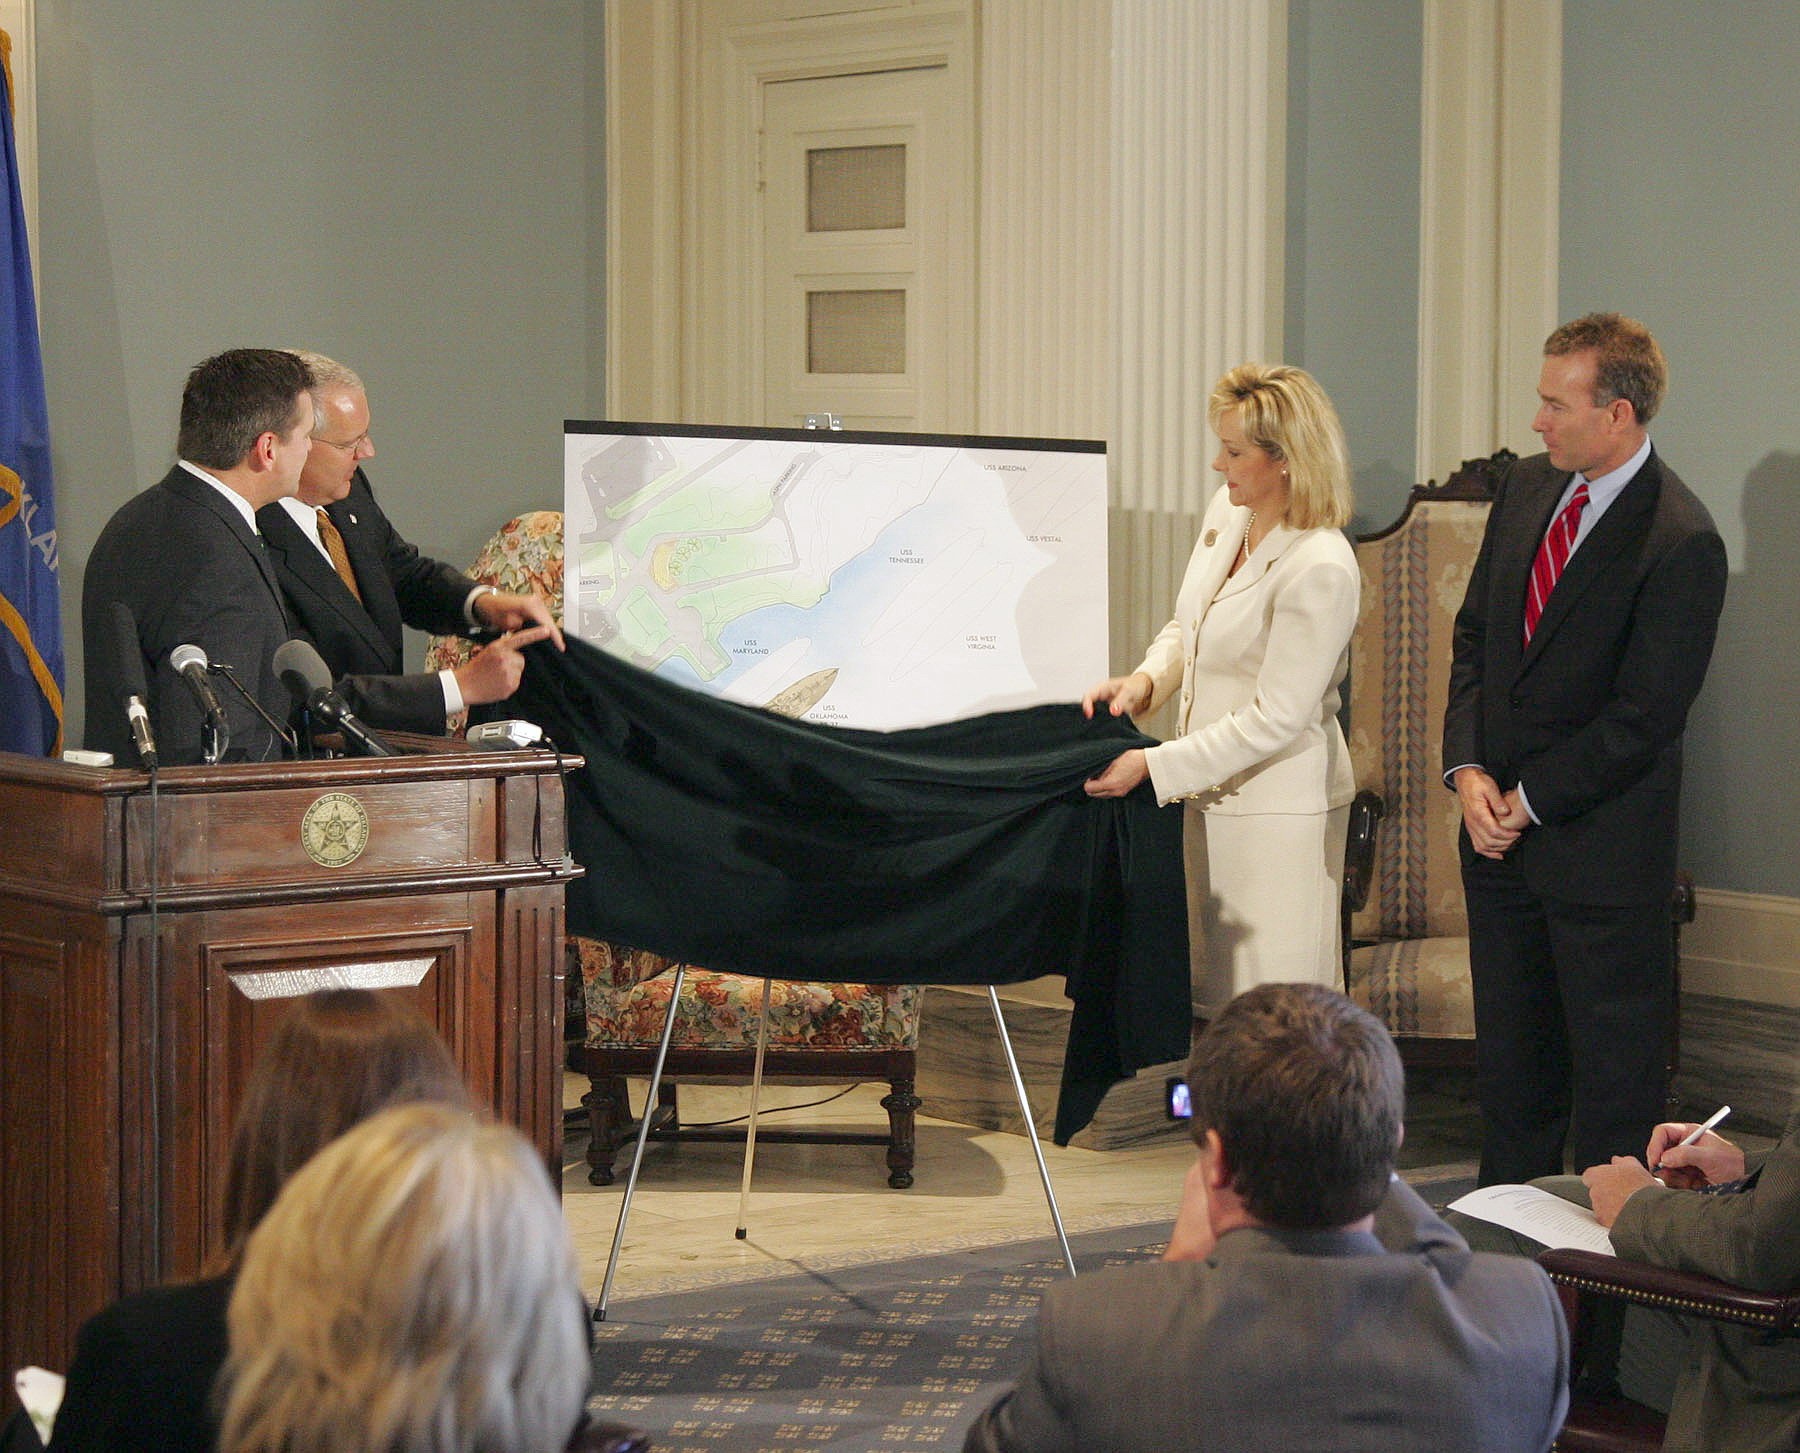 Arcitect Don Beck and Sen. Jim Reynolds look on as Gov. Henry and Lt. Gov. Fallin unveil initial memorial plans.